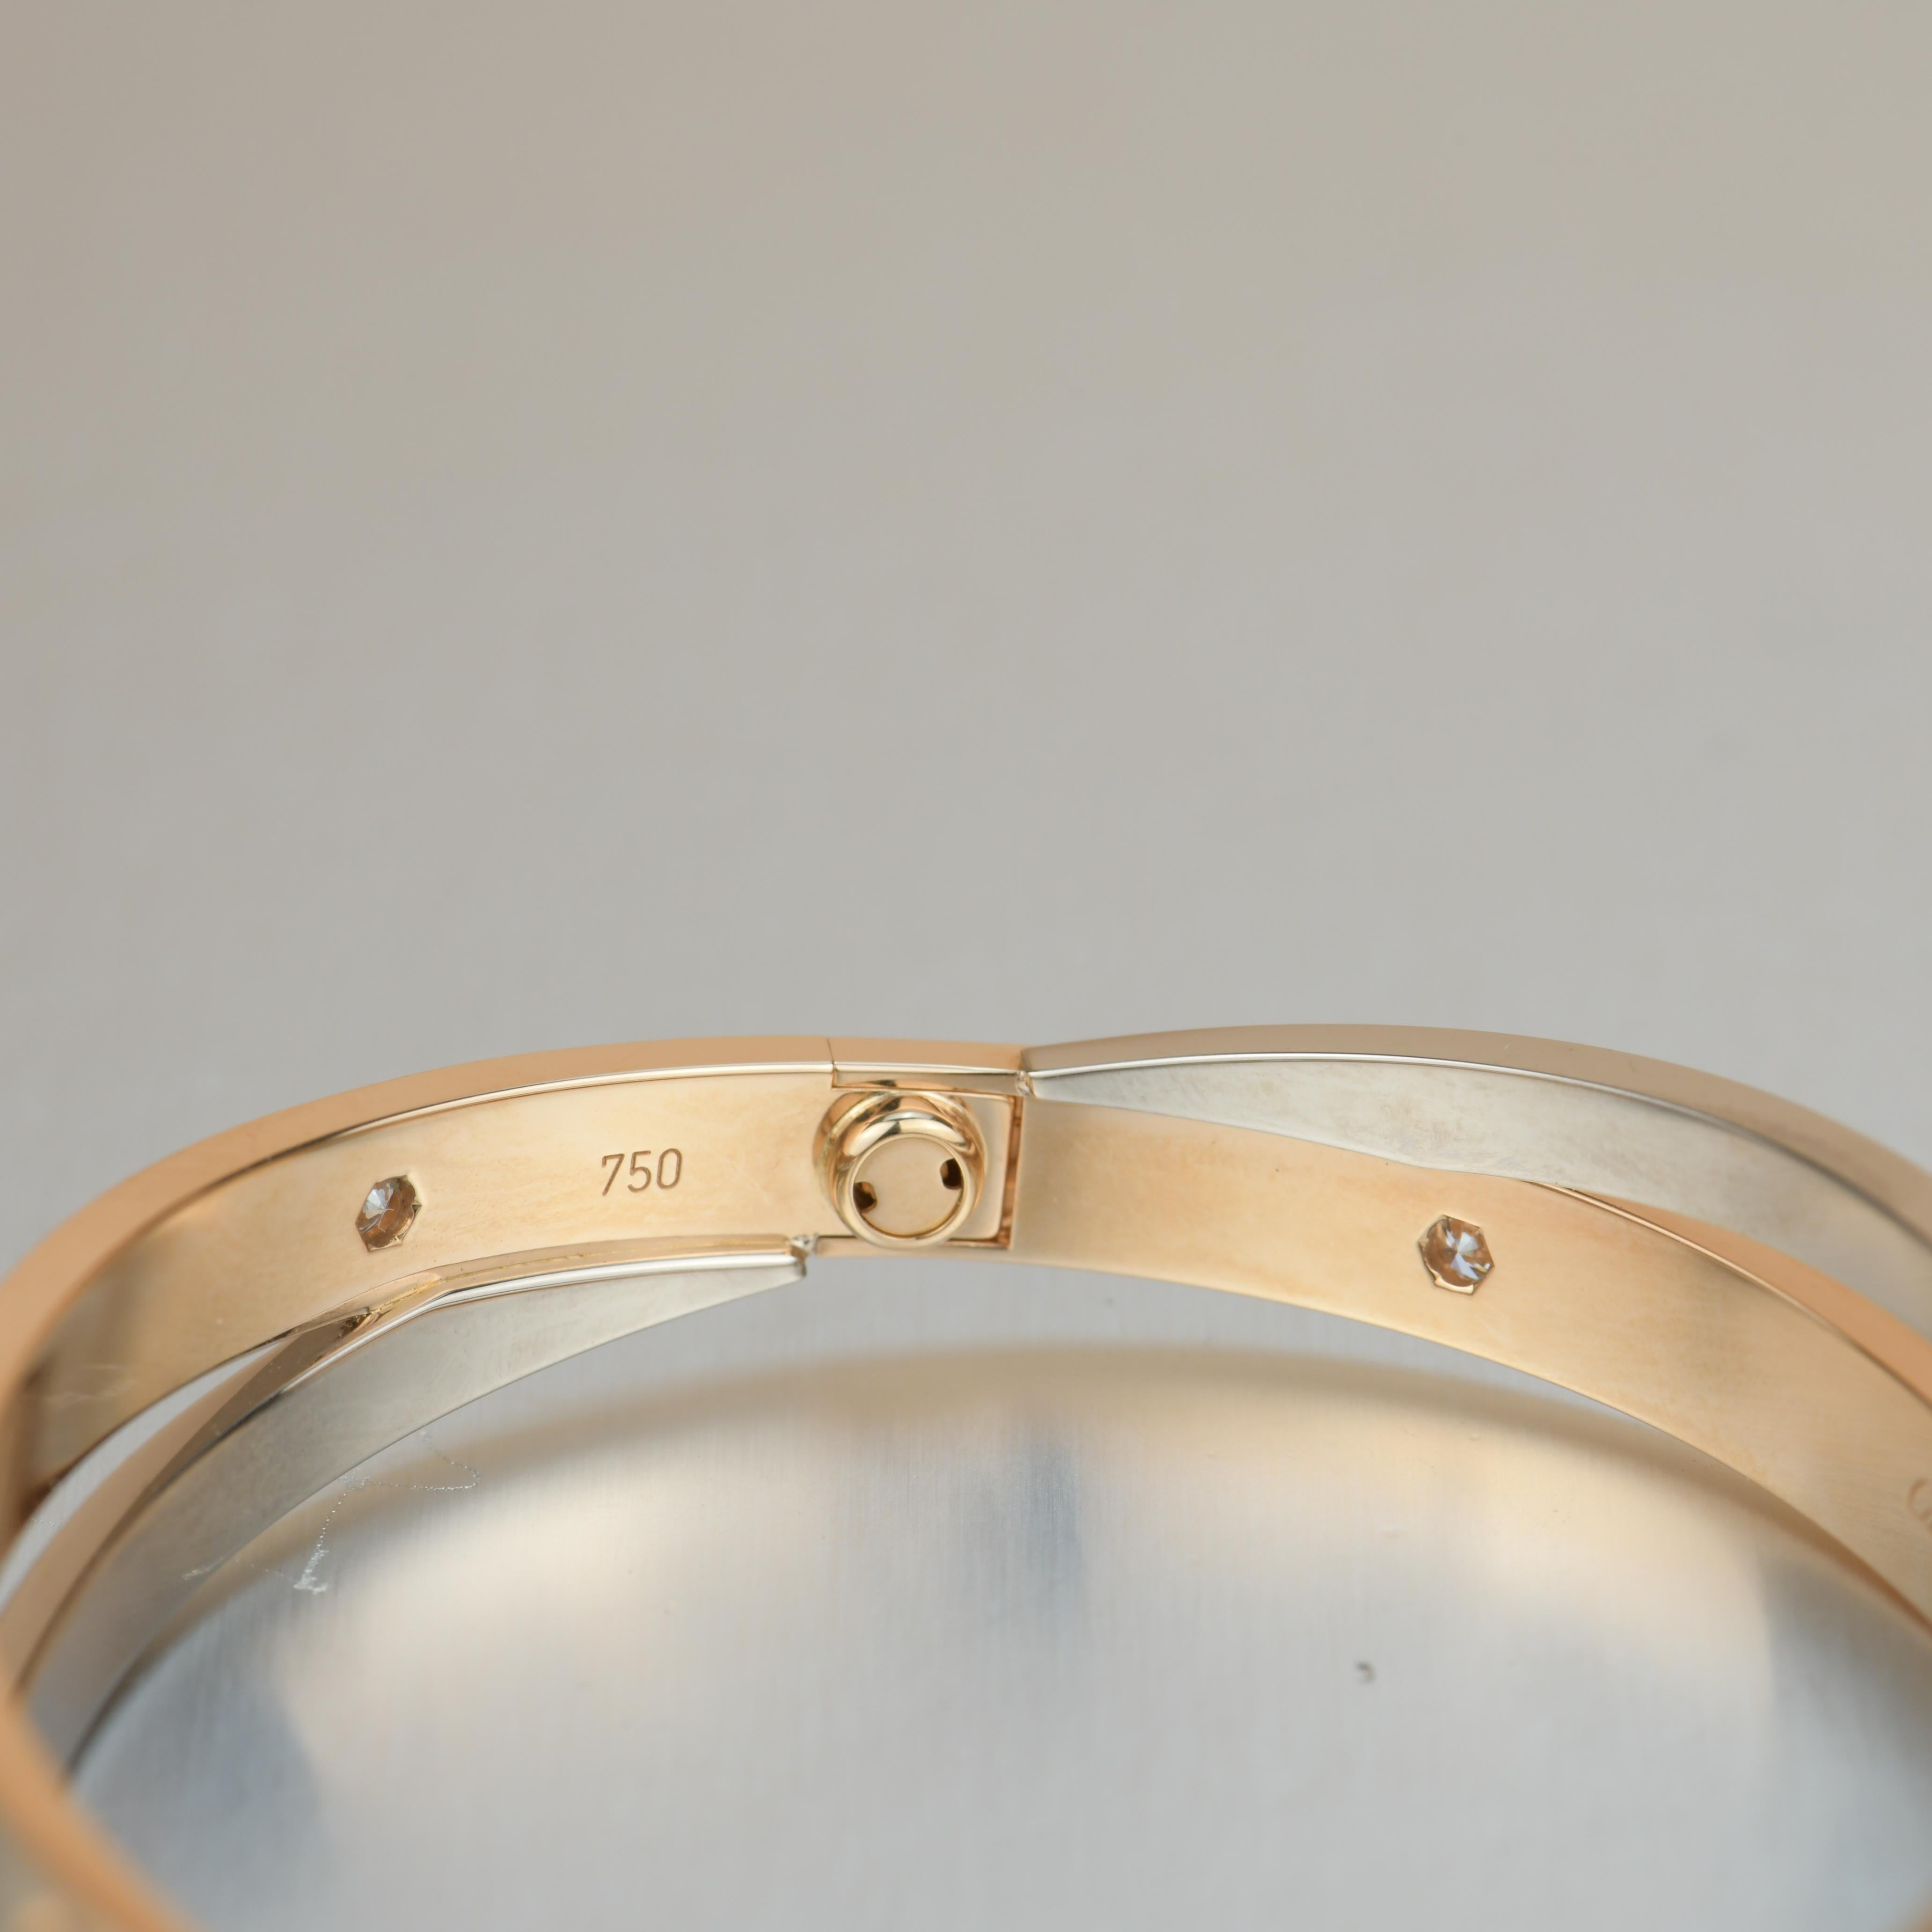 Cartier Limited Edition White and Rose Gold Diamond Love Bracelet 1